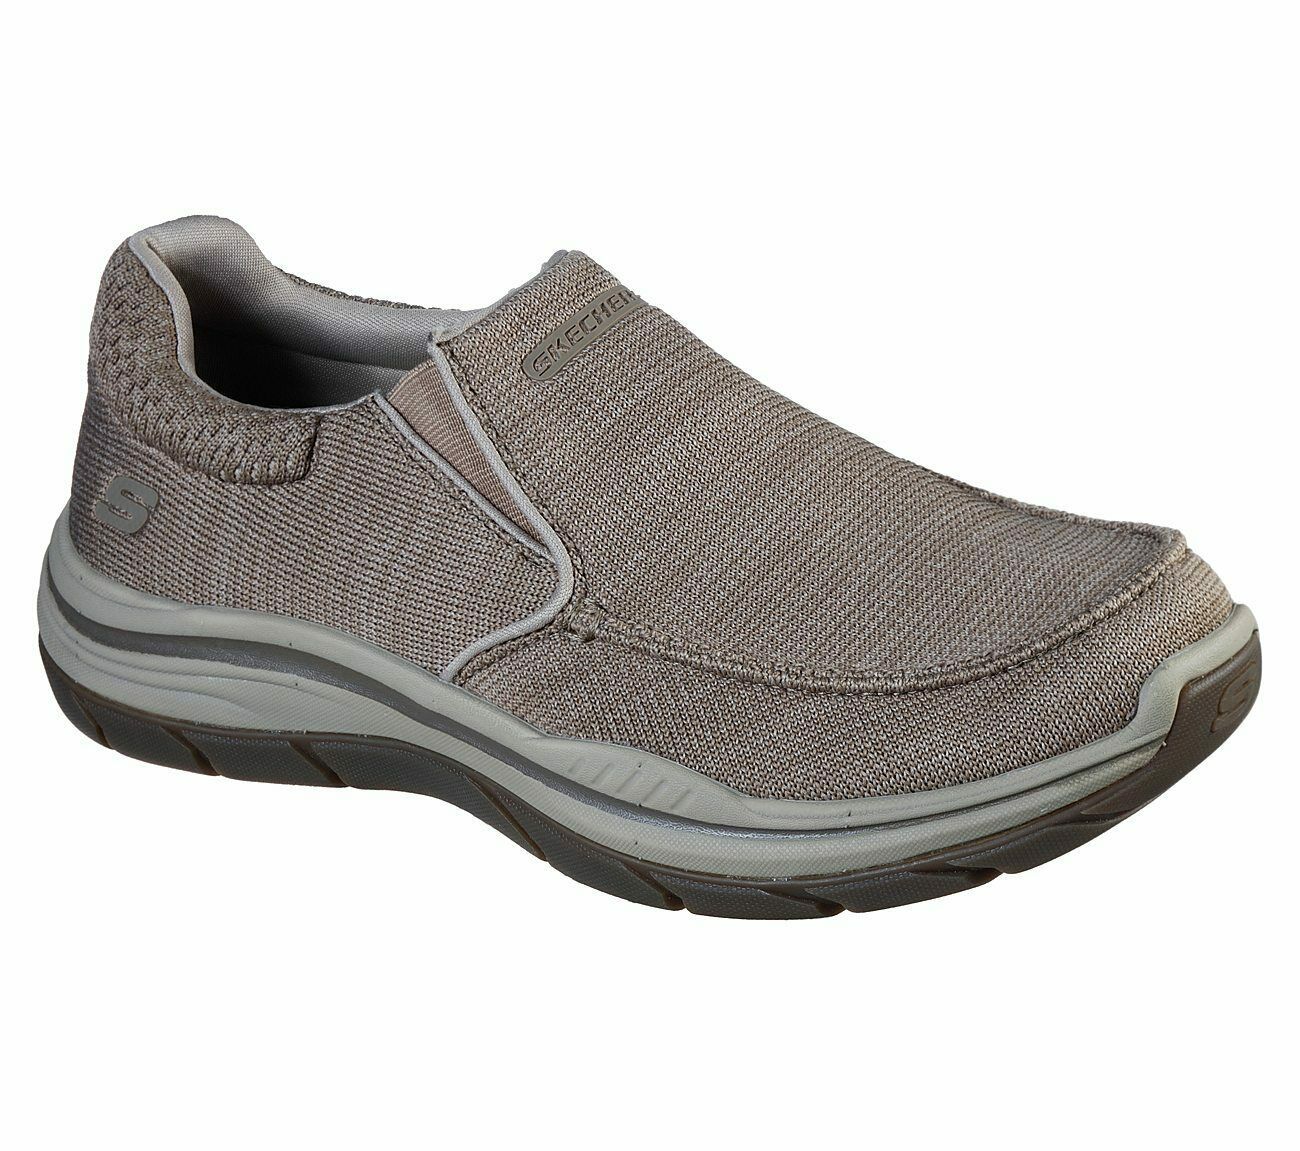 Skechers Taupe Shoes Men's Comfort Slip On Casual Memory Foam Loafer ...